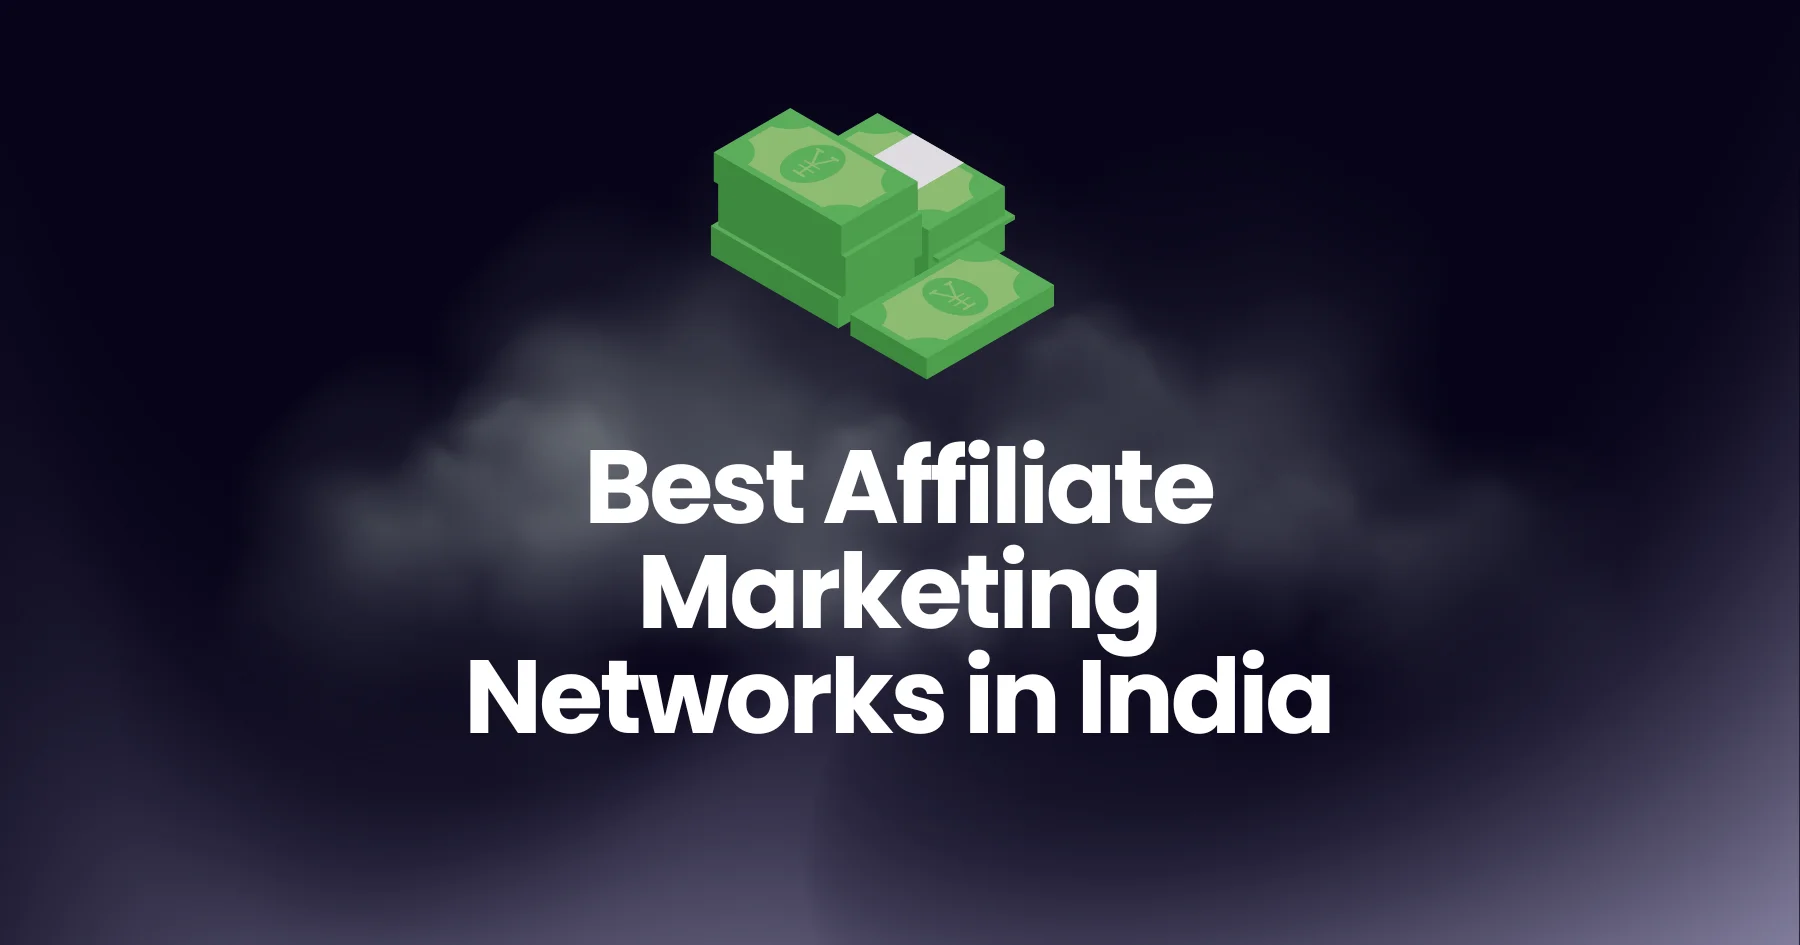 Best Affiliate Marketing Networks in India